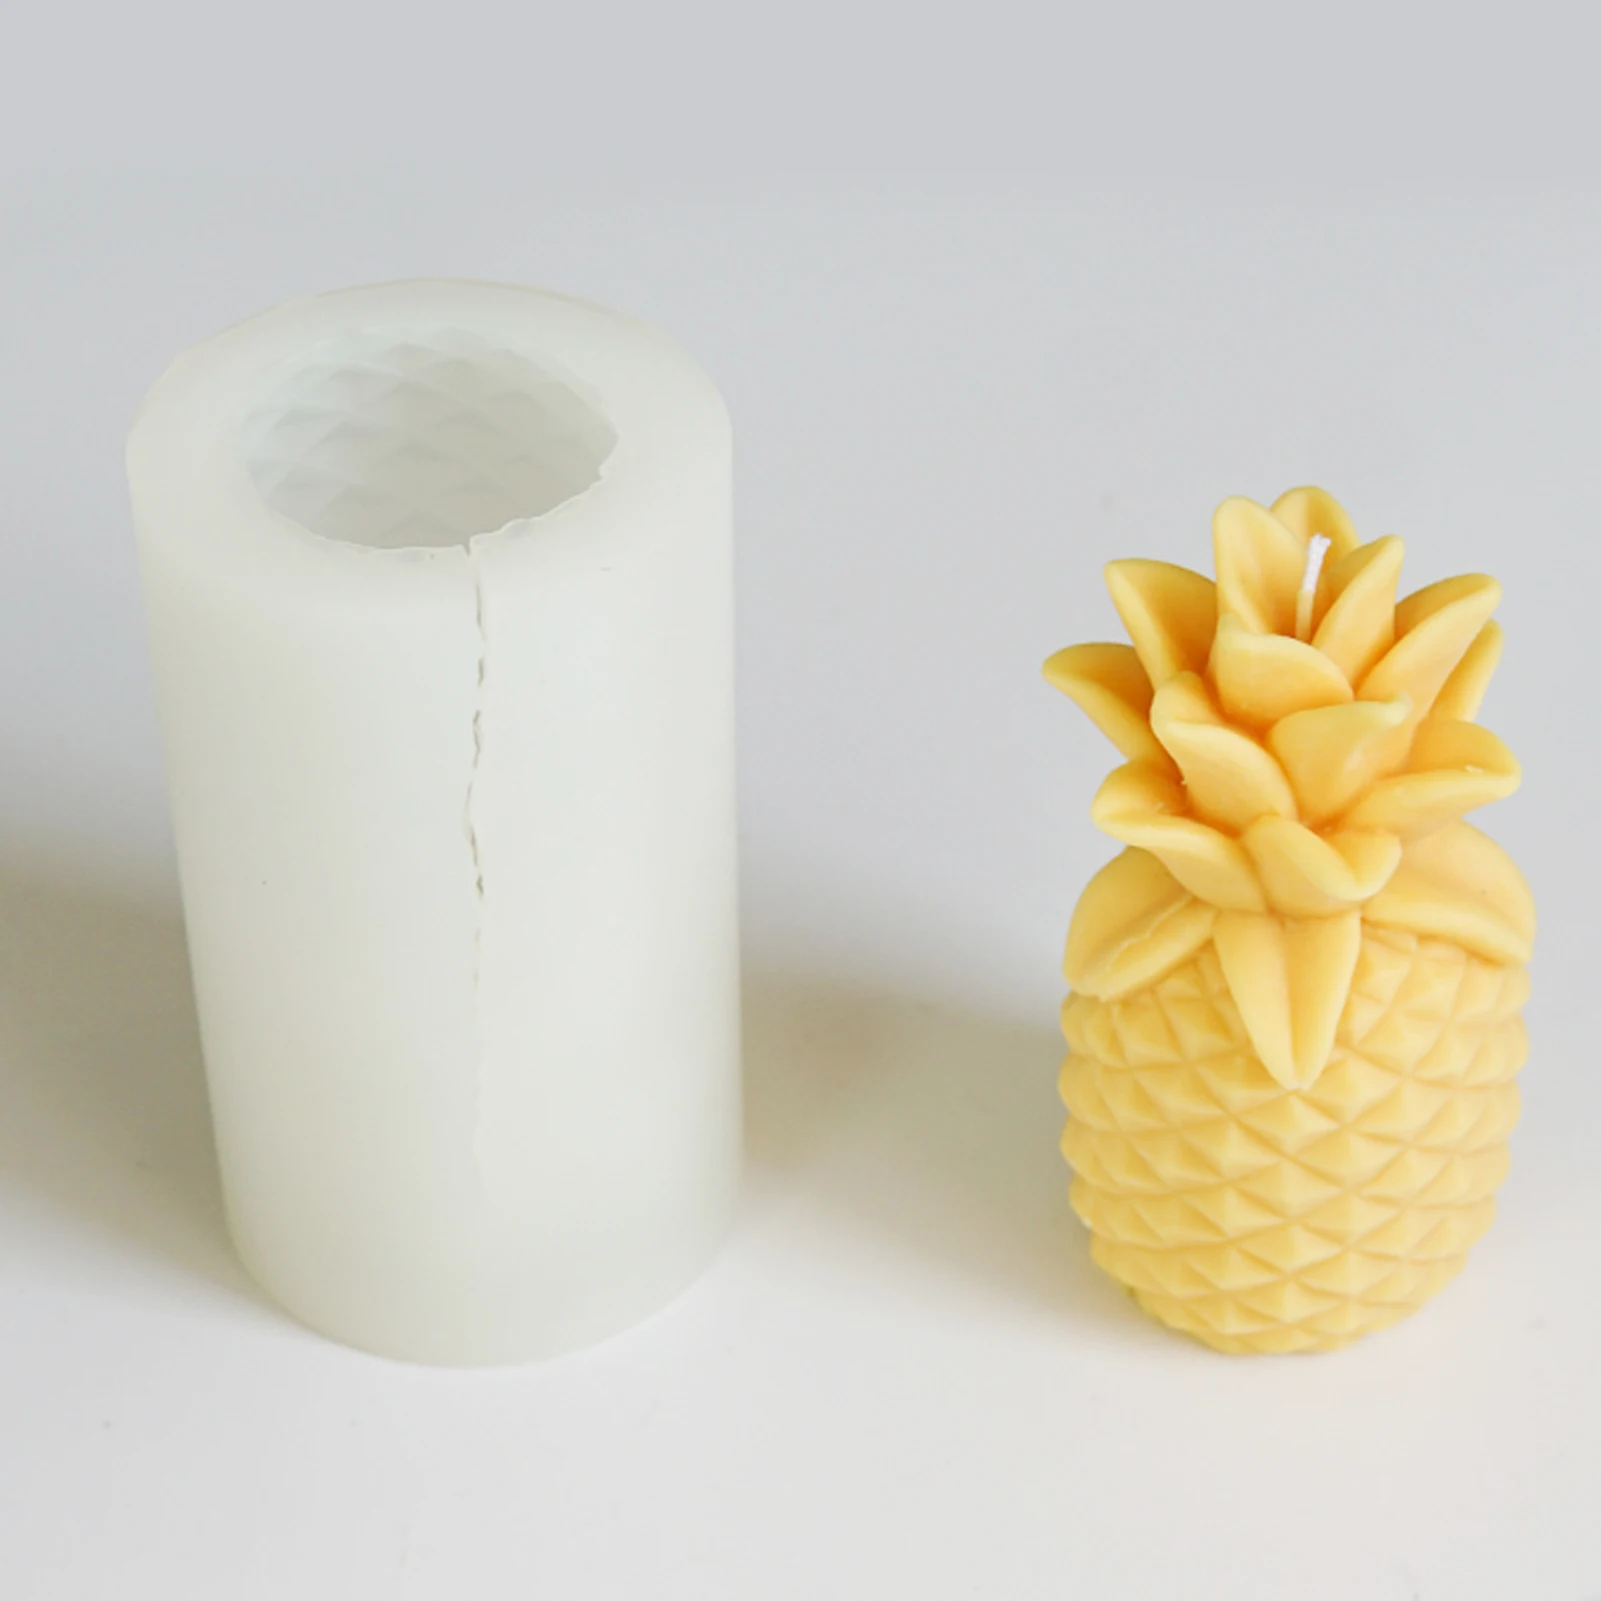 3D pineapple shape silicone Mold Scented Candle mold cake decoration tool Candy Chocolate Mold Kitchen Baking decoration